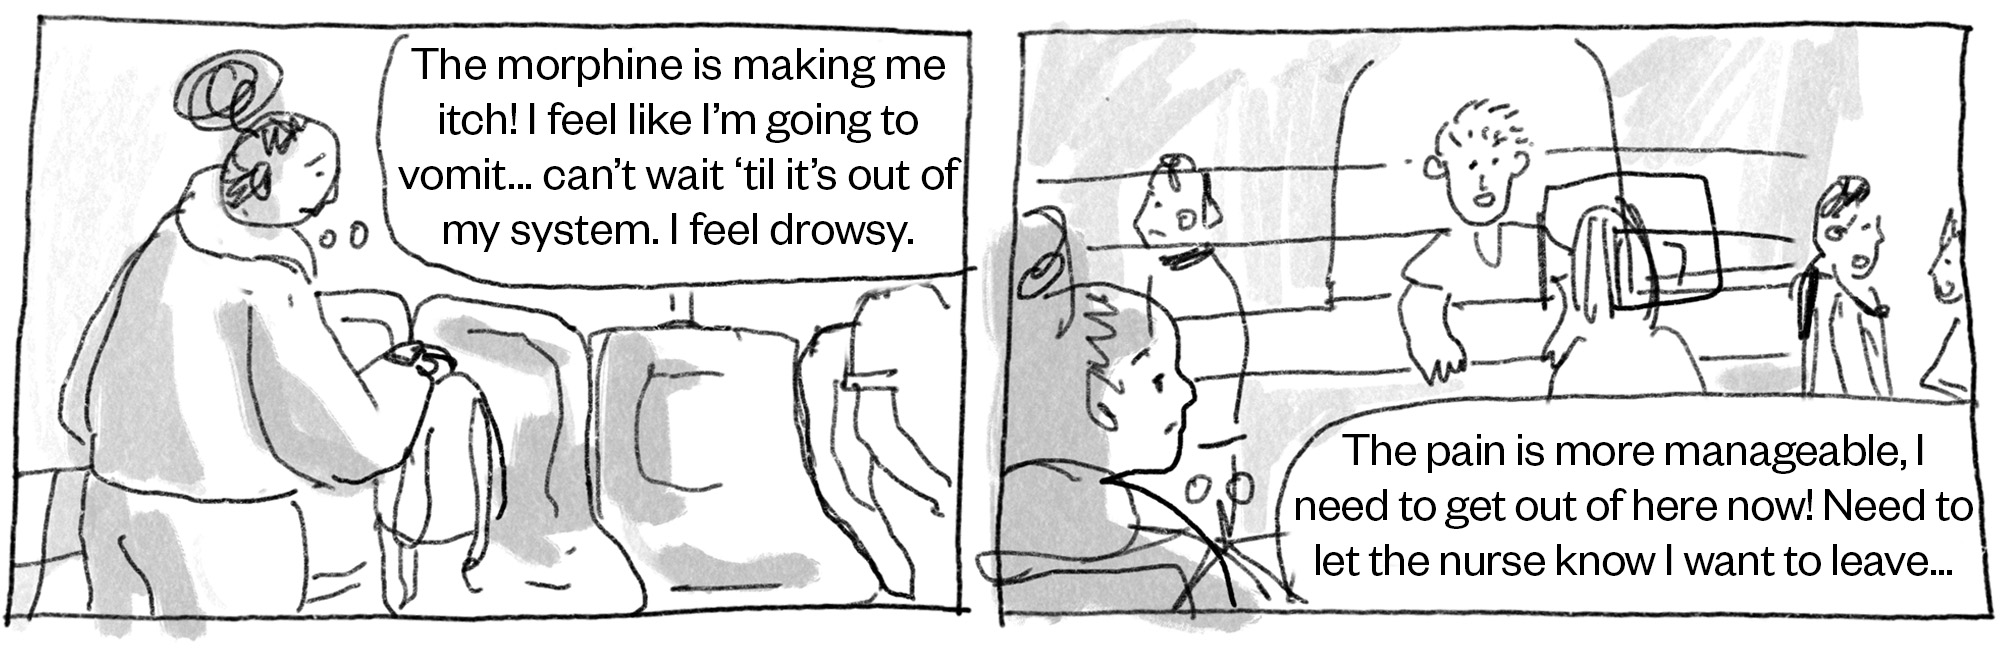 Two comic panels, in the first the woman is getting up from her treatment and saying "The morphine is making me itch! I feel Iike I’m going to vomit... can’t wait ‘til it’s out of my system. I feel drowsy." In the second she is waiting to leave, with a speech bubble saying, "The pain is more manageable, I need to get out of here now! Need to let the nurse know I want to leave..."